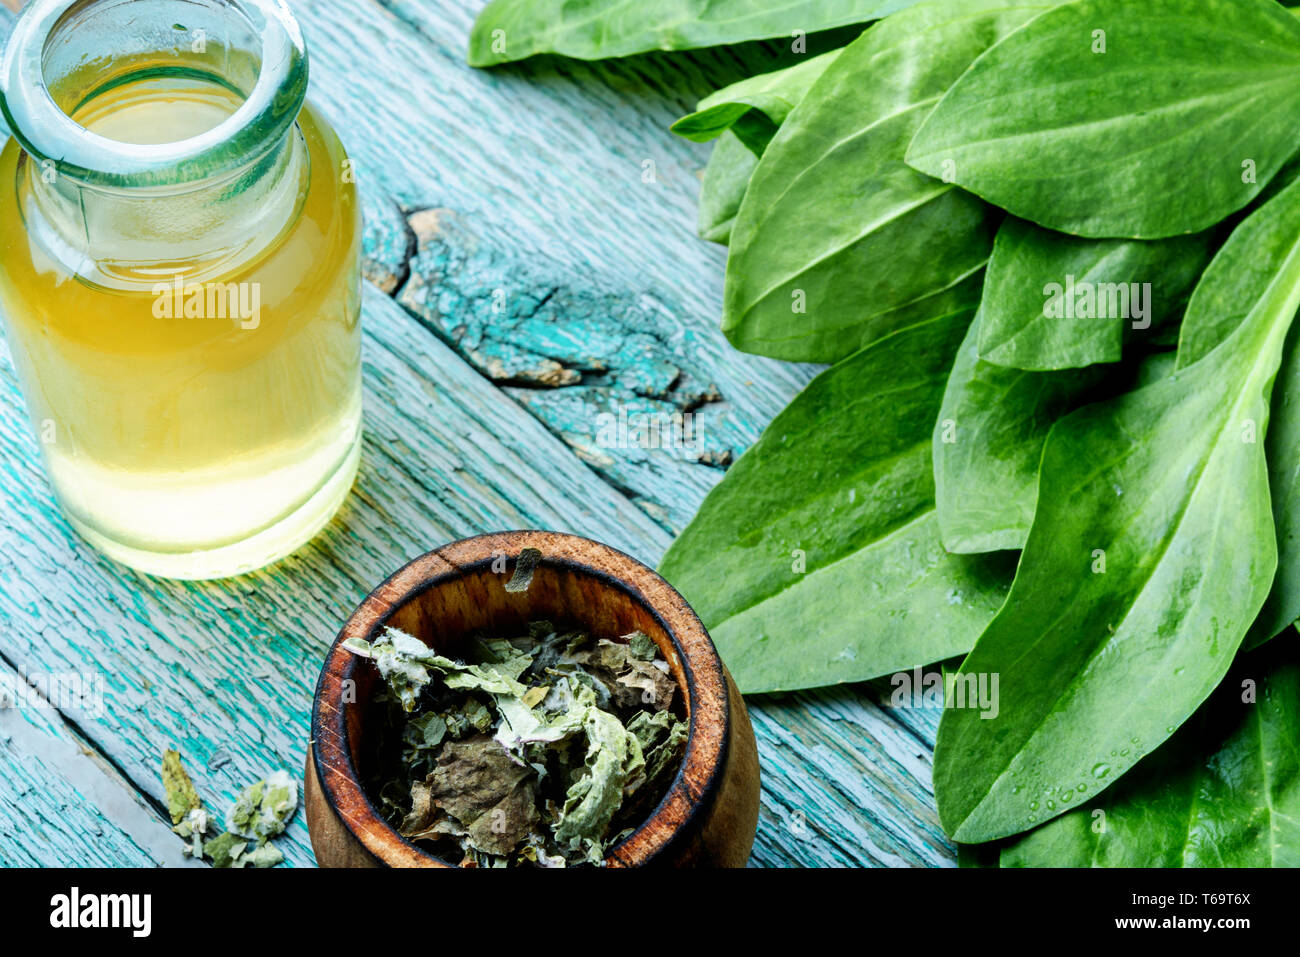 Leaf of greater plantain.Healing herbs.Leaves of a plantain Stock Photo